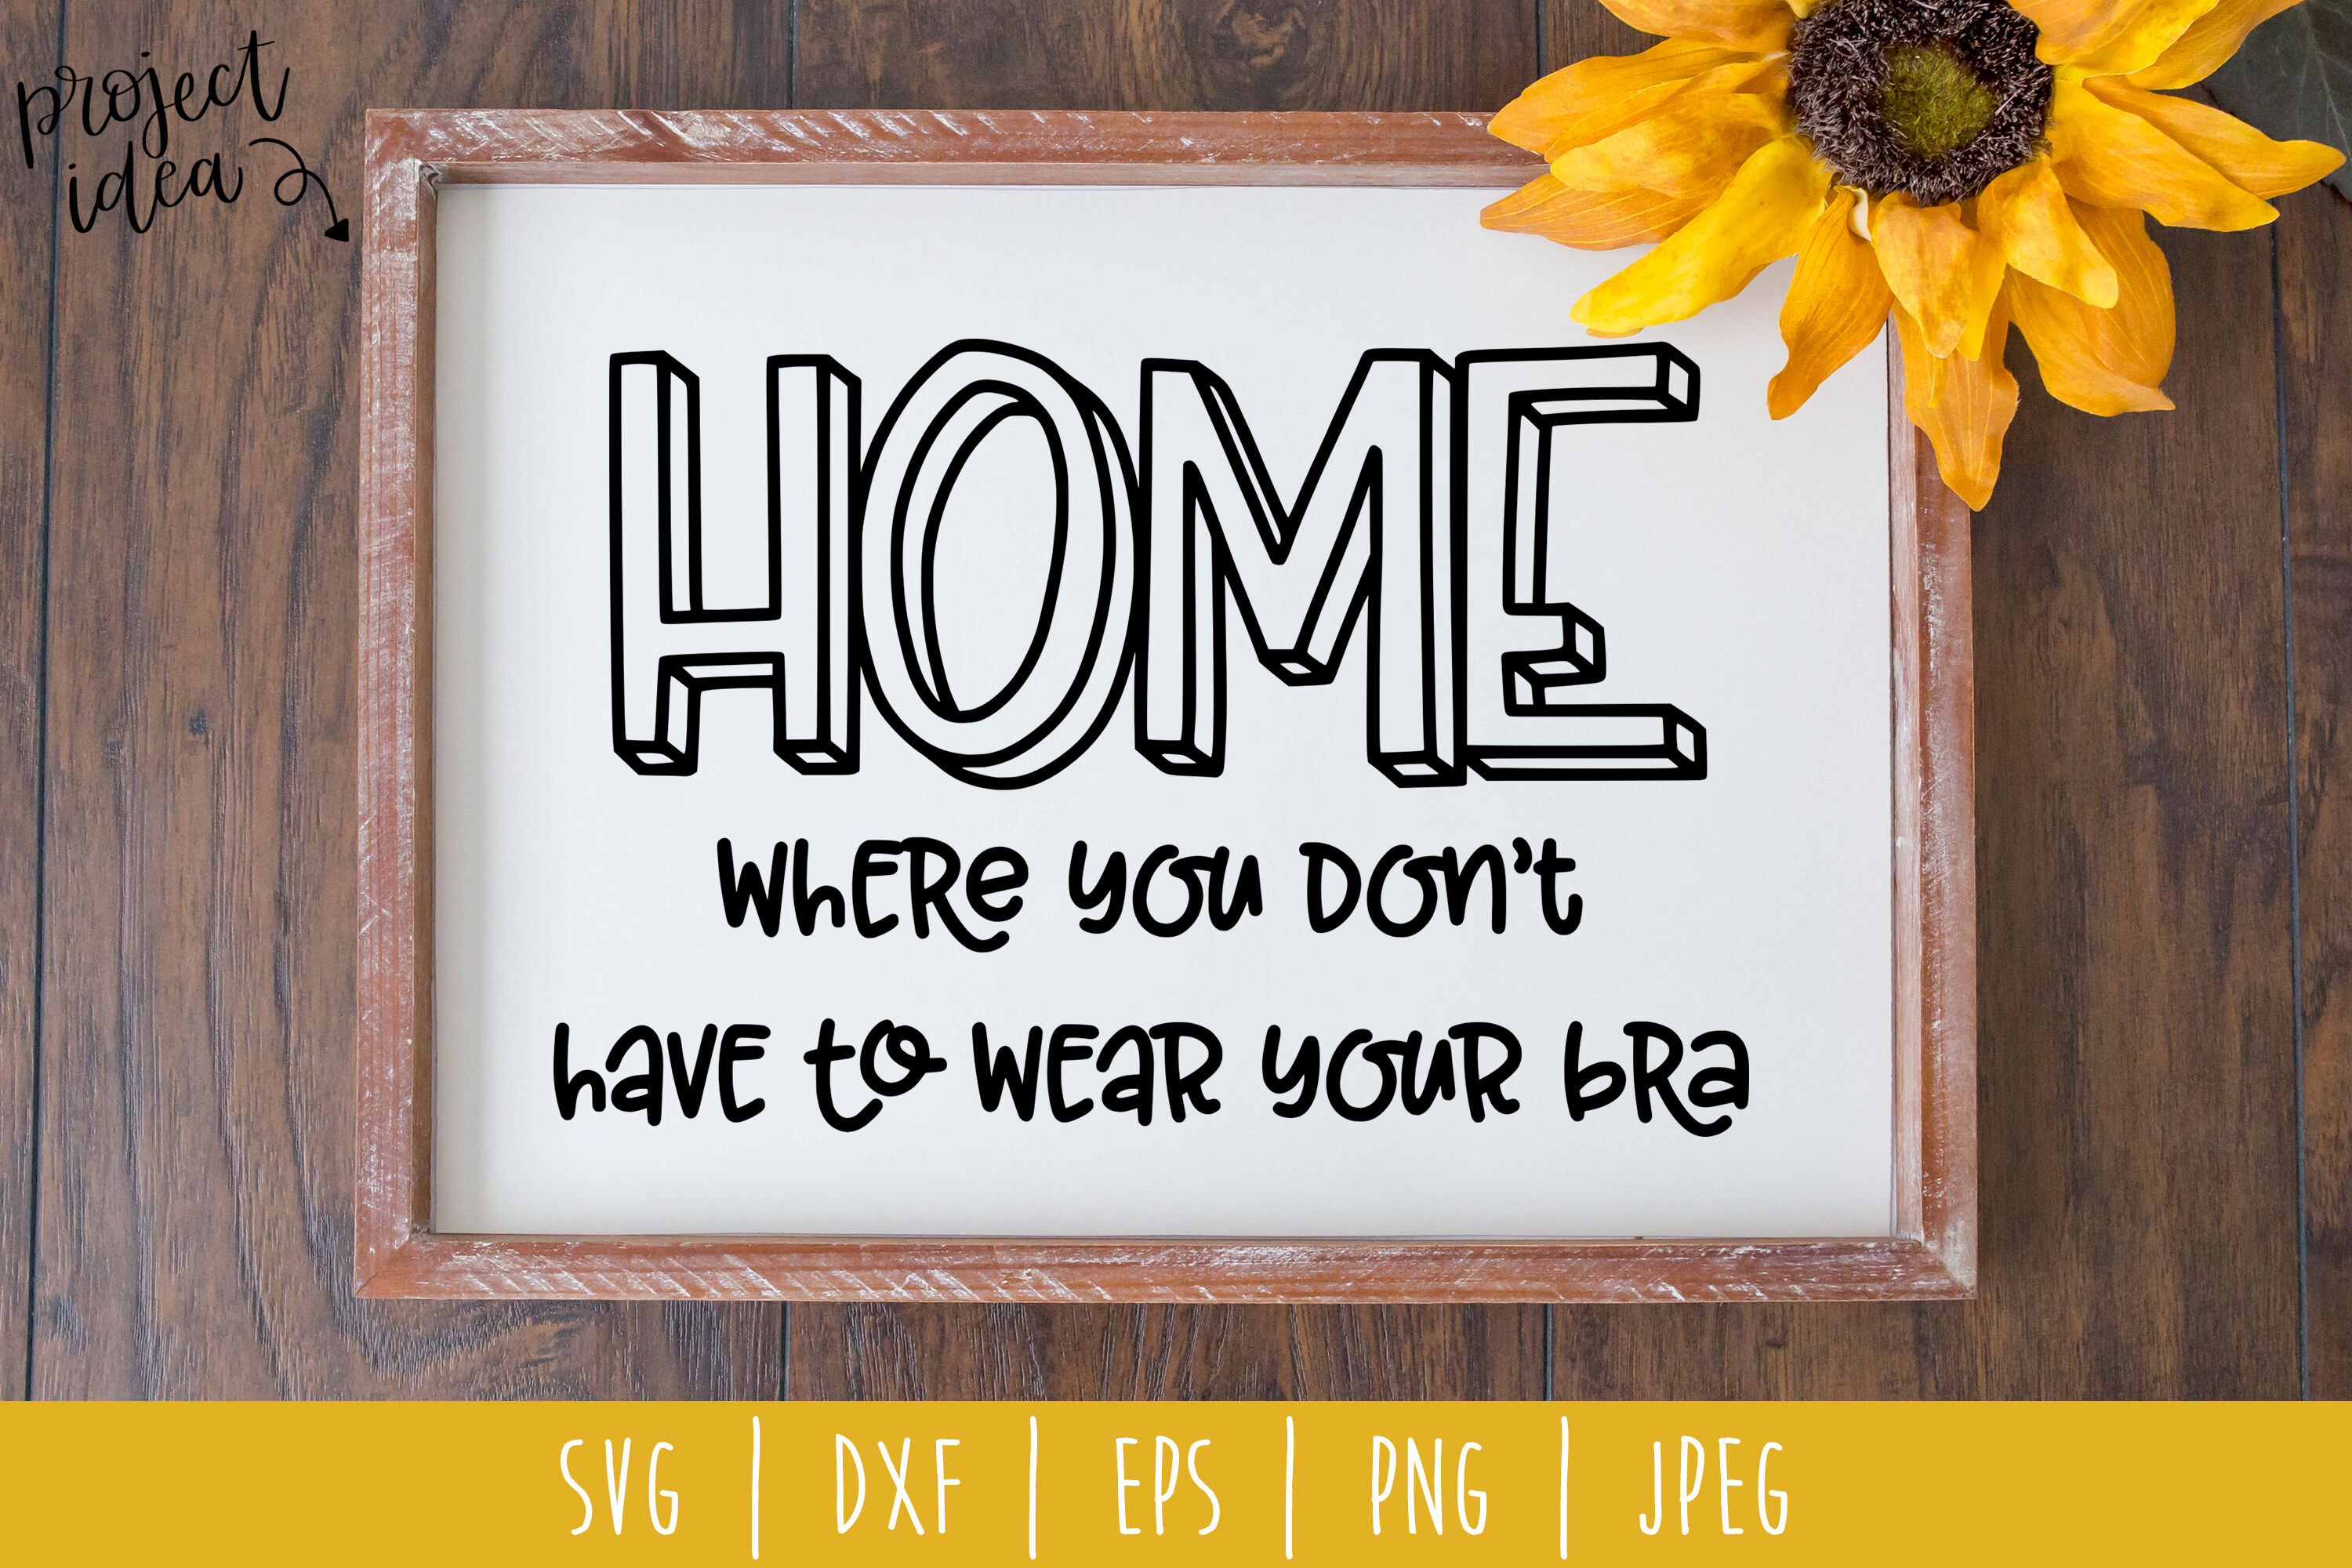 Home Where You Don T Have To Wear Your Bra Svg Dxf Eps Png Jpeg By Savoringsurprises Thehungryjpeg Com